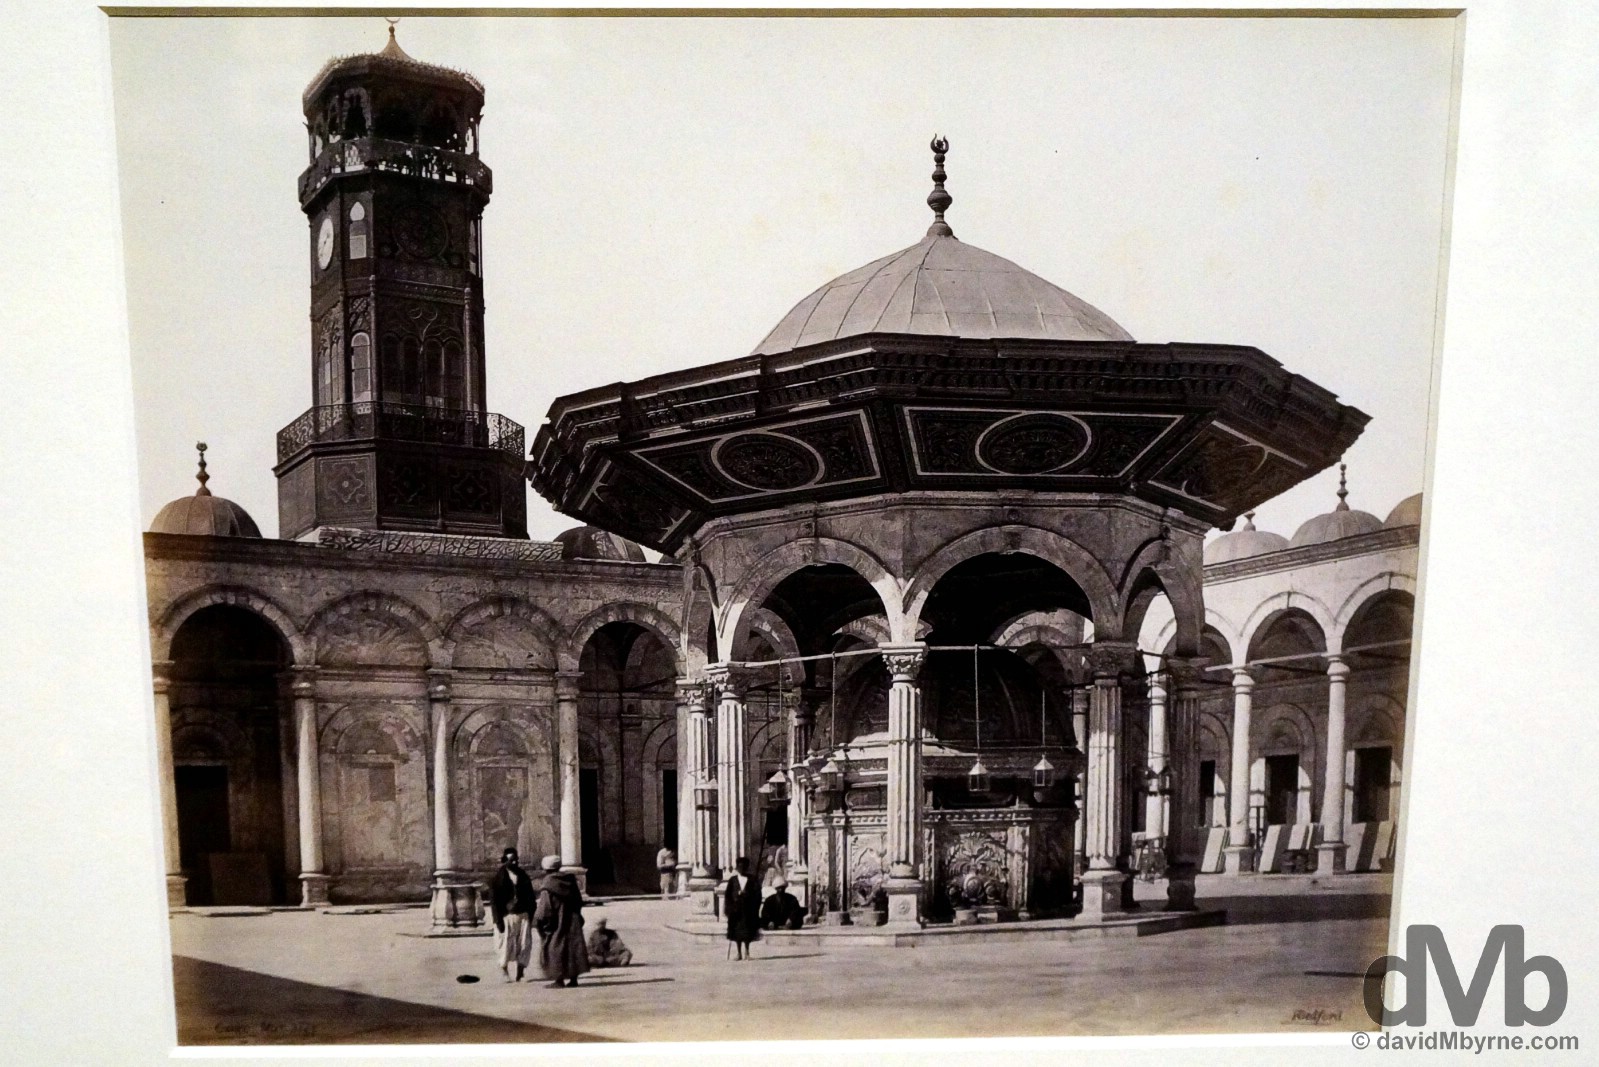 A Francis Bedford (1815-1894) capture of the fountain in the courtyard of the Mosque of Muhammad Ali in the Saladin Citadel in Cairo, Egypt. Captured on March 3, 1862, & on display as part of the Cairo to Constantinople Exhibit in the Queen's Gallery of Buckingham Palace, London, England. December 14, 2014.